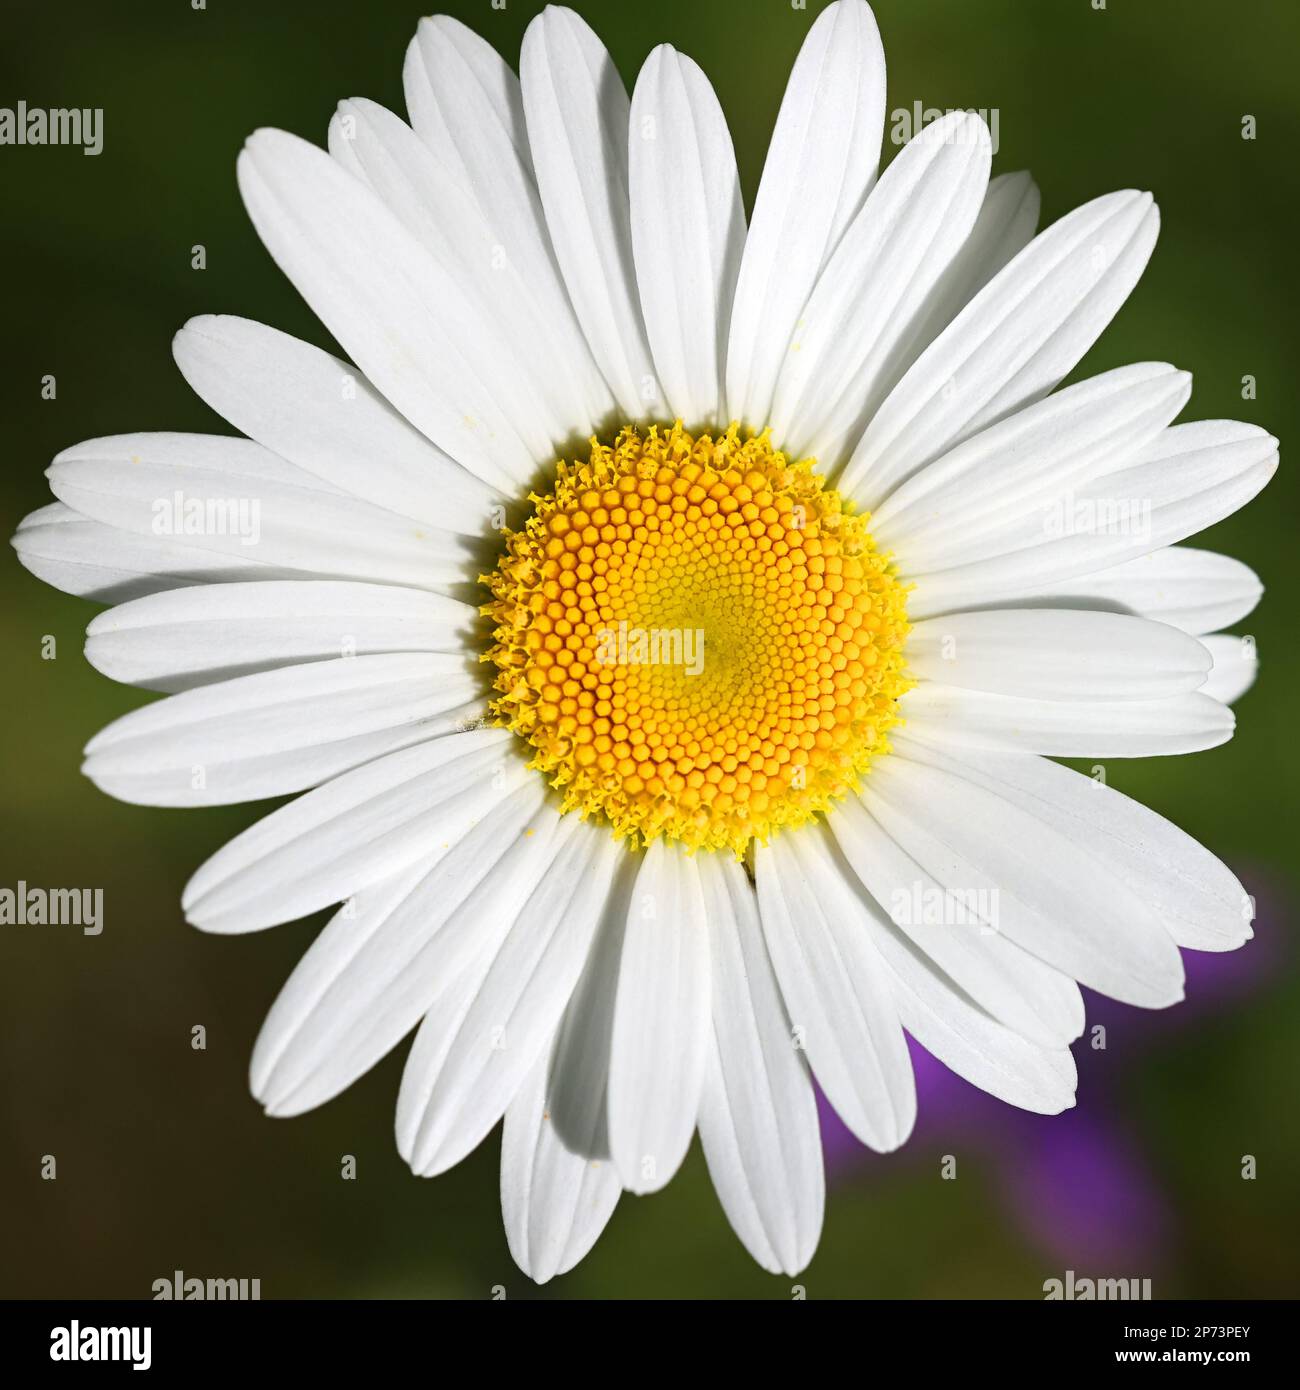 Leucanthemum vulgare, commonly known as the ox-eye daisy, oxeye daisy, dog daisy, wild plant from Finland Stock Photo